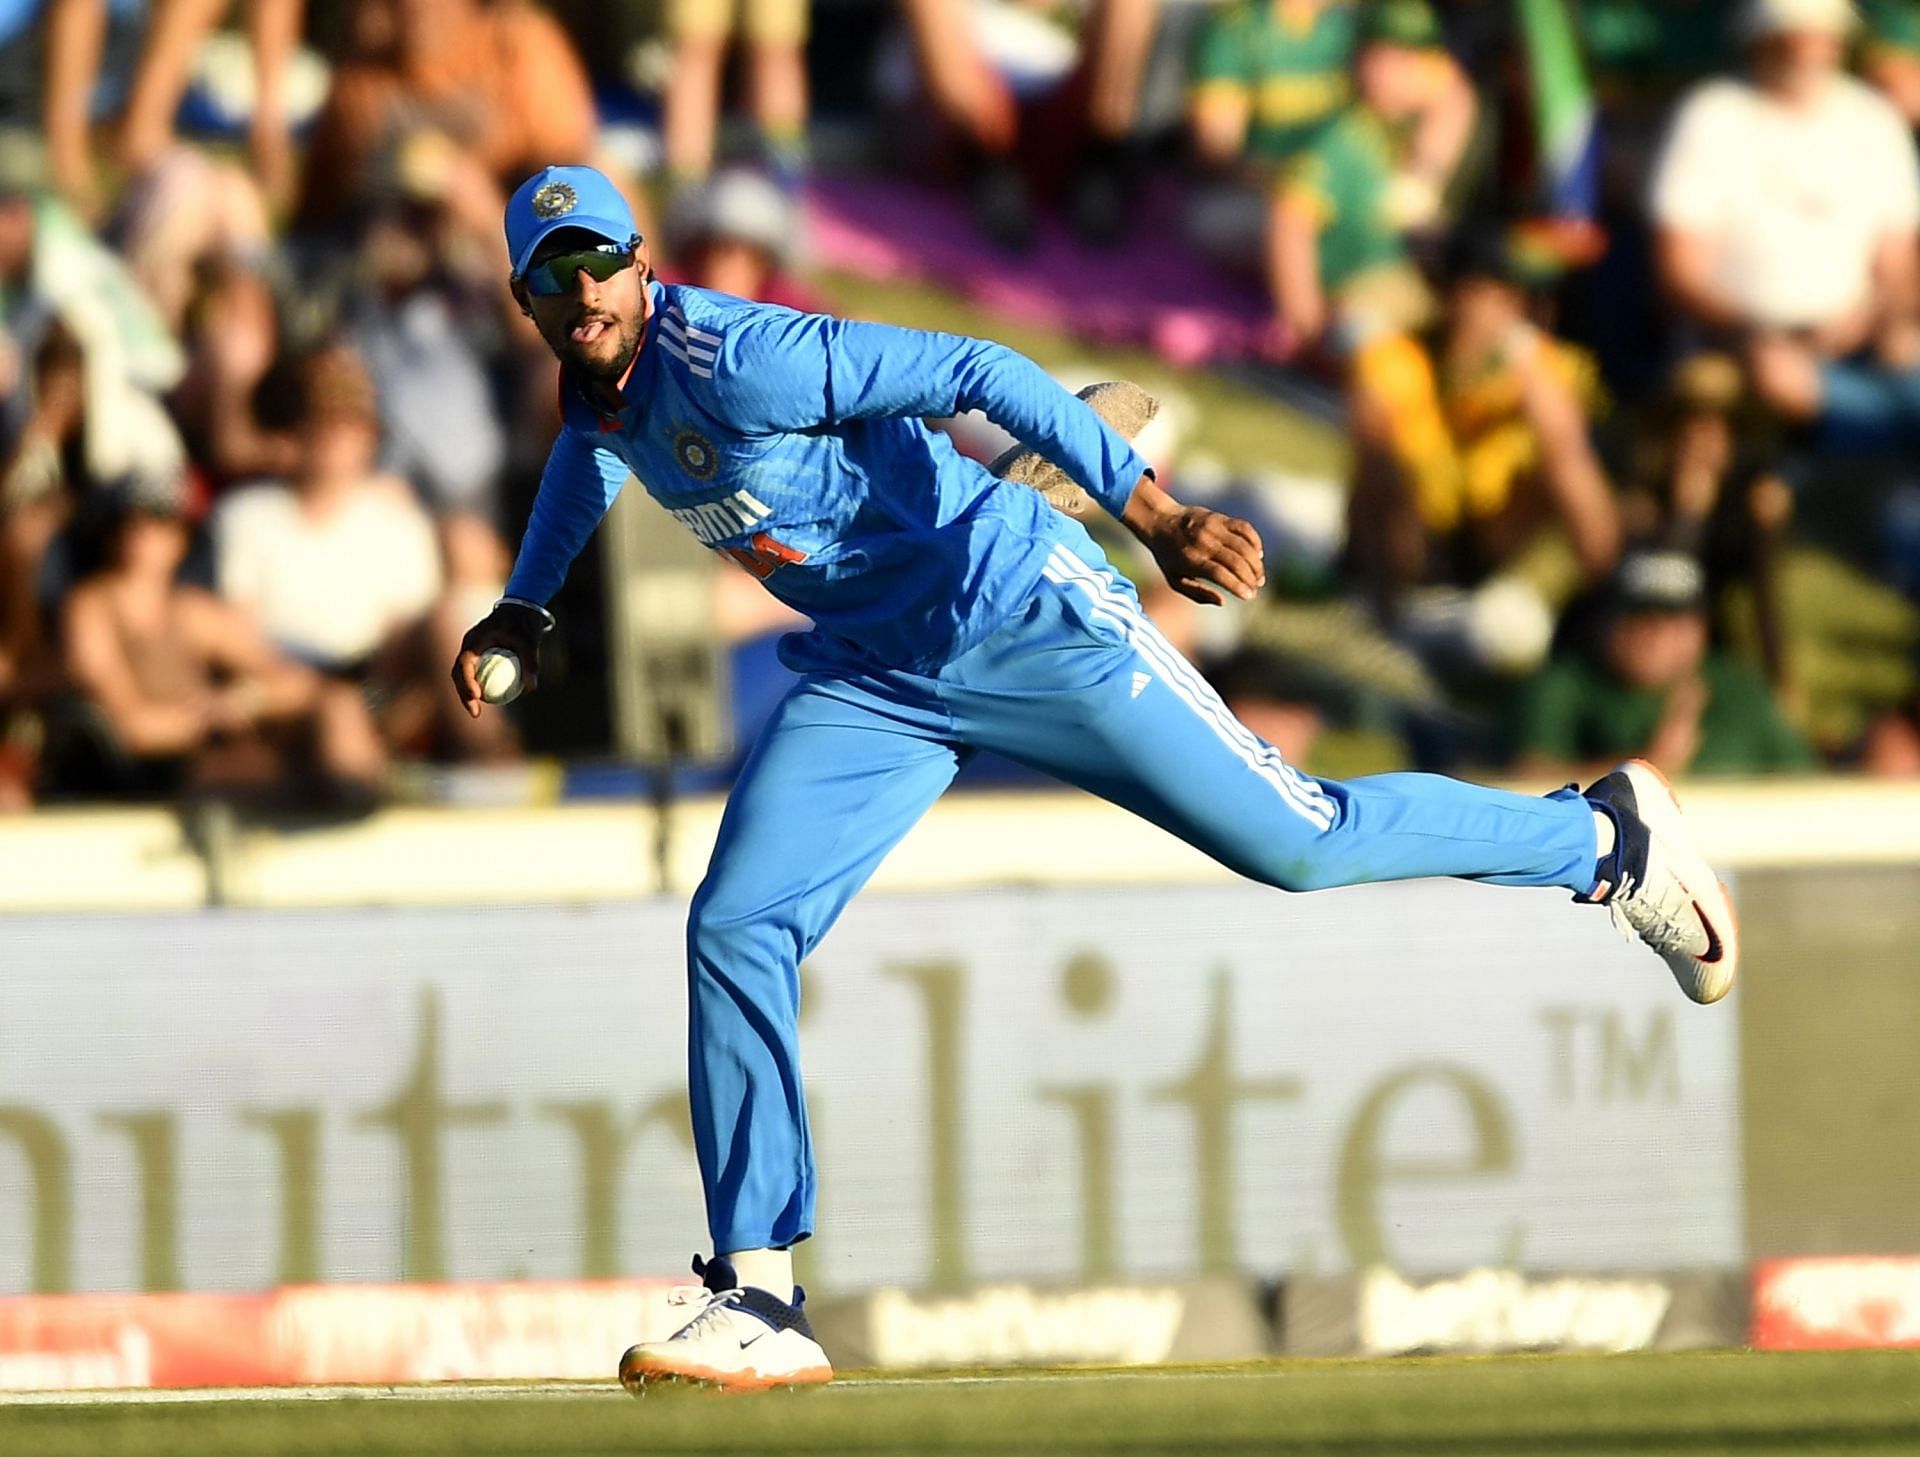 Tilak Varma has picked up two wickets in five overs in T20Is. (P/C: Getty)